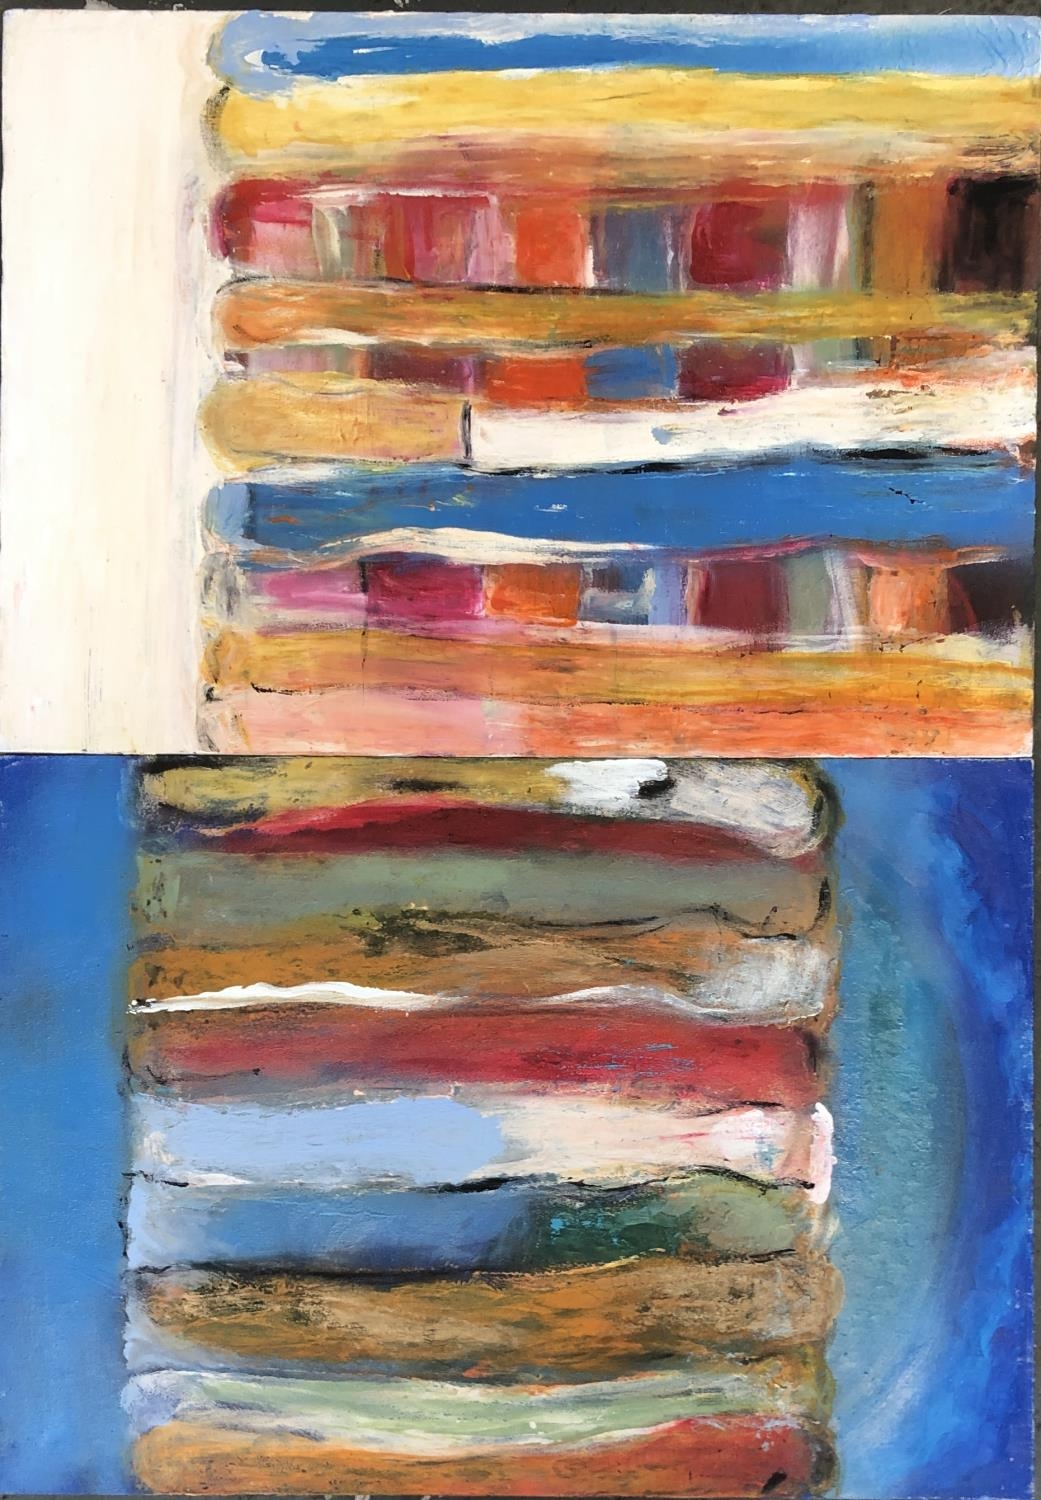 Two abstract works on canvas, each 50x70cm